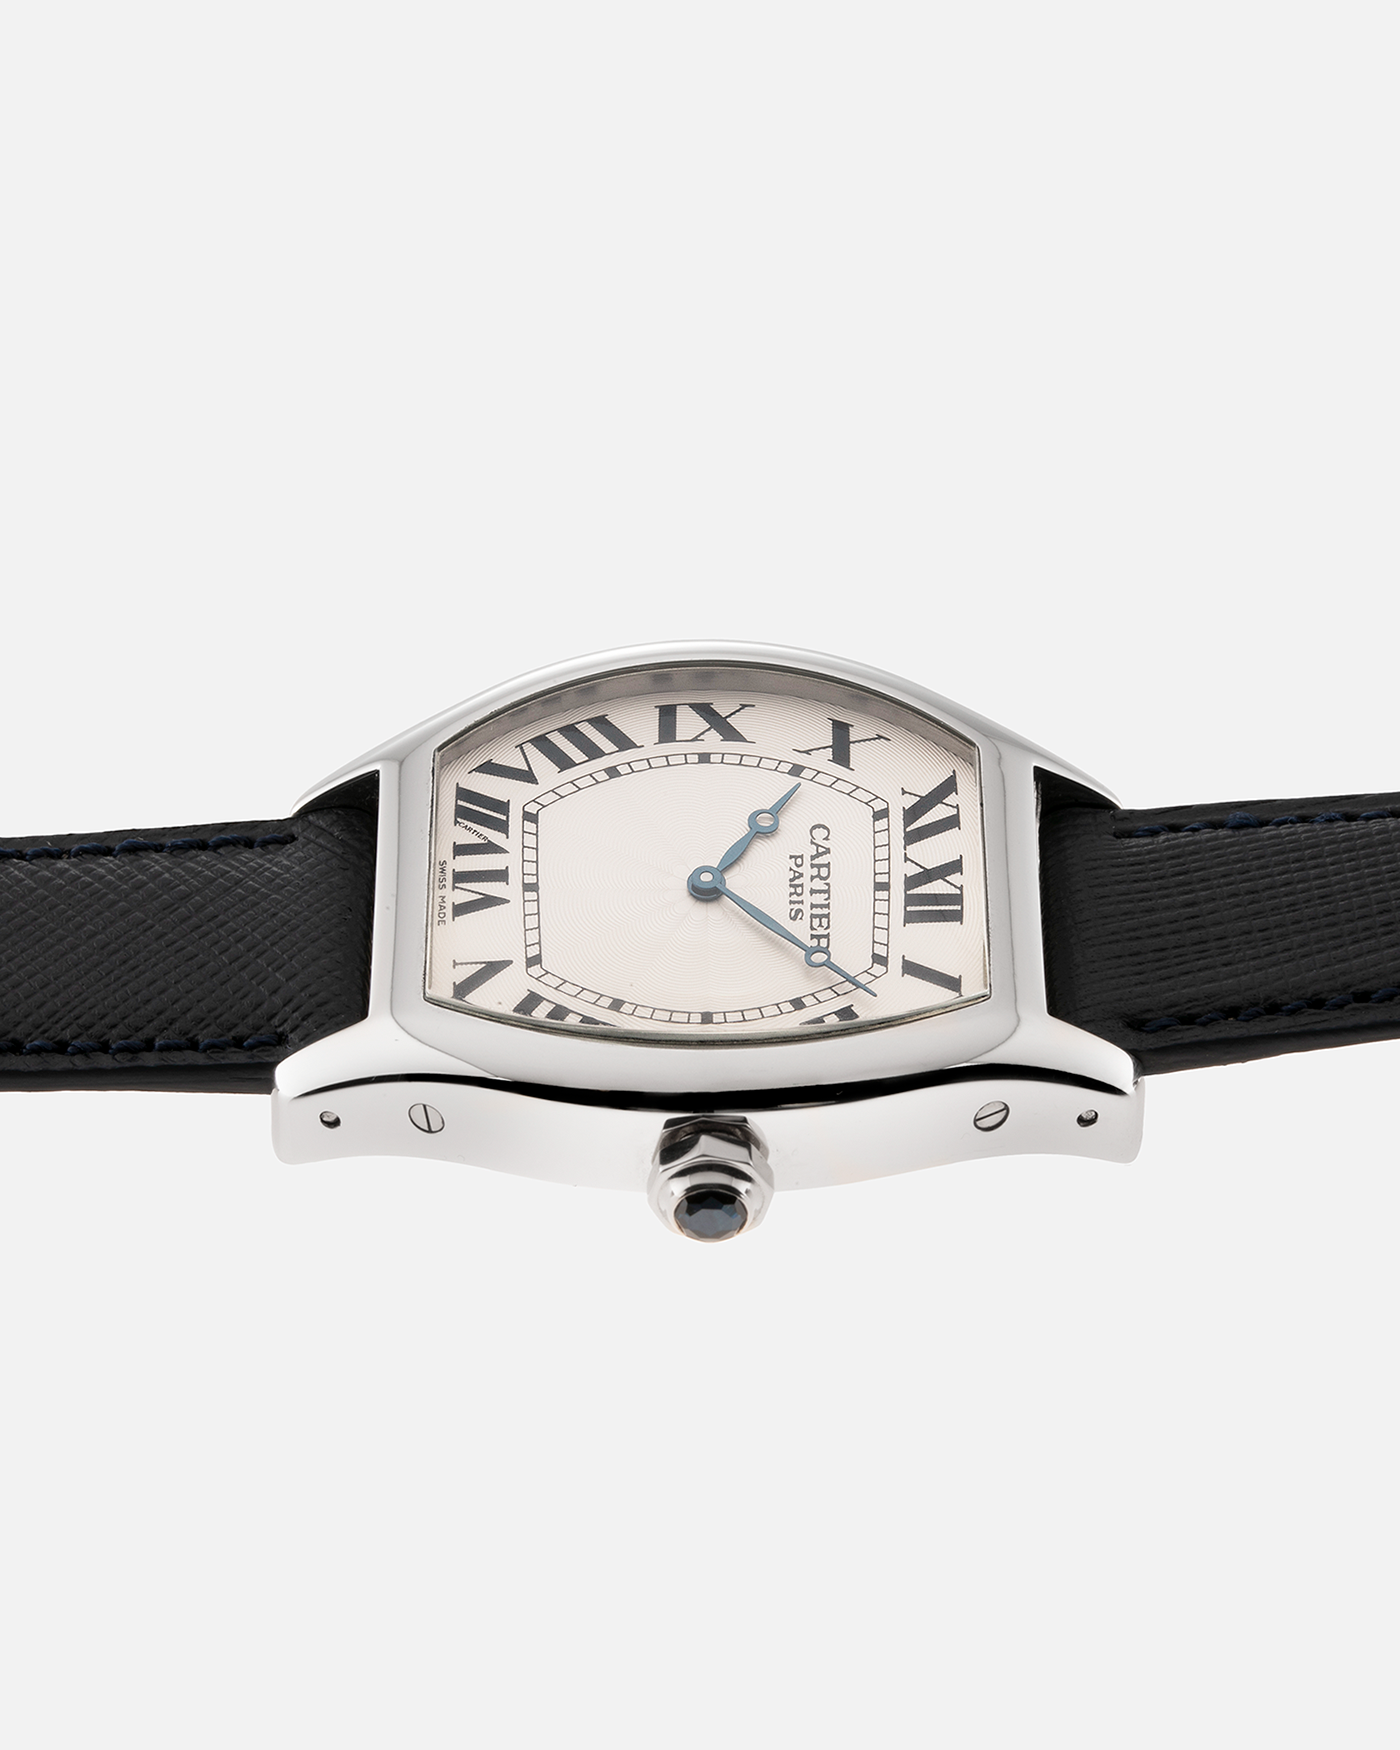 Brand: Cartier Year: 2011 Model: CPCP Collection Prive Tortue XL Reference: 2764 Material: Platinum Movement: Cartier Jaeger LeCoultre 9601MC Case Diameter: 48mm X 38mm including lugs Strap: Navy Blue Molequin Textured Calf Strap with 18k White Gold Deployant